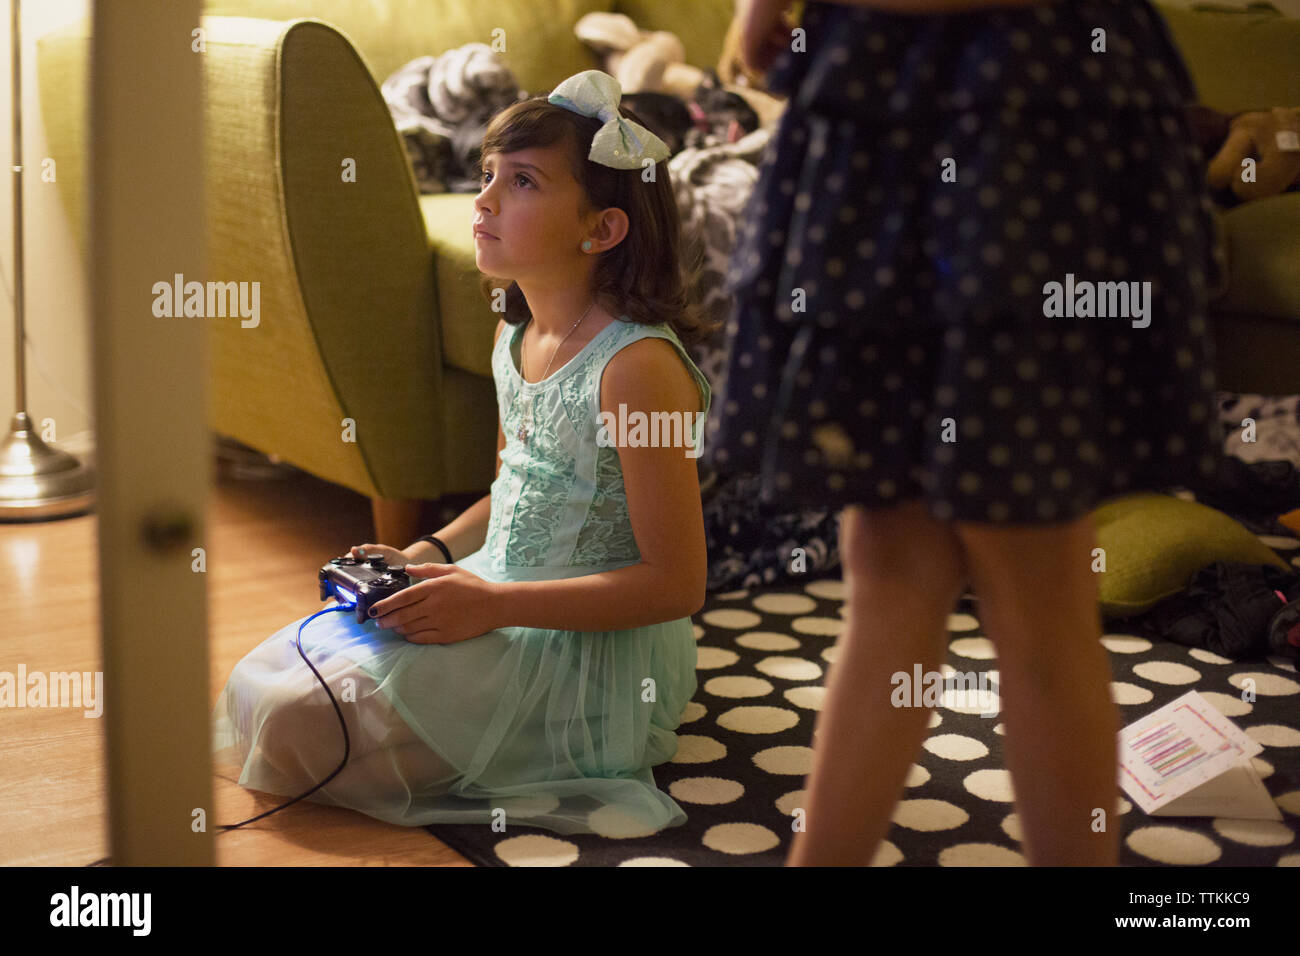 Cute girl playing video game at home Banque D'Images